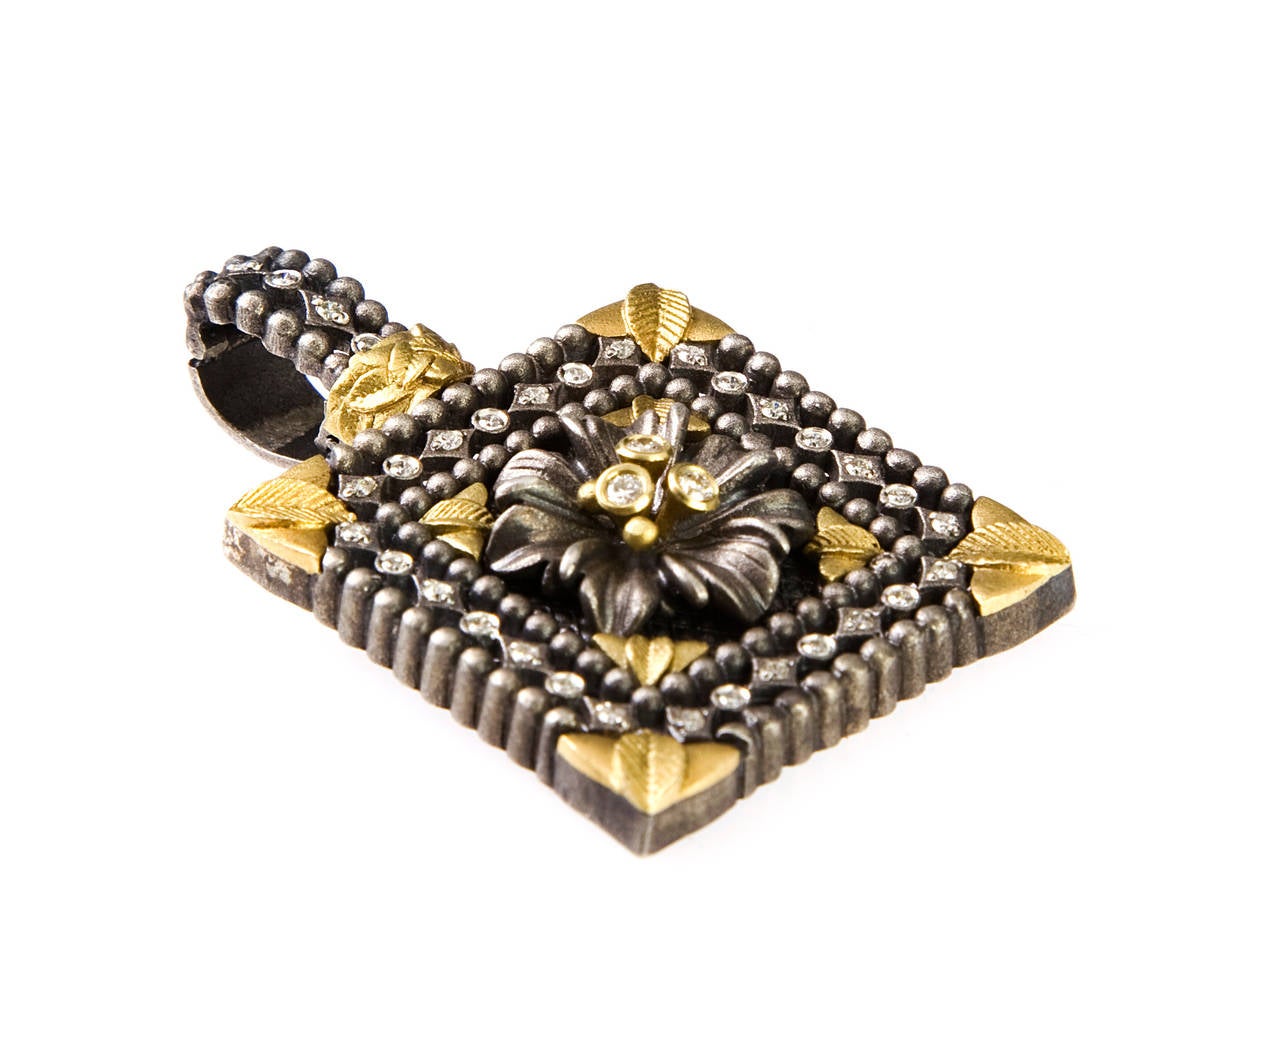 Aged Silver & 18K Gold and Diamond Floral Square Enhancer Pendant

Centered is a Organza Flower surrounded with Diamonds. 

0.44 carat diamonds

2 inches in length. 1.2 inches wide.

Signed STAMBOLIAN and has the Trademark 